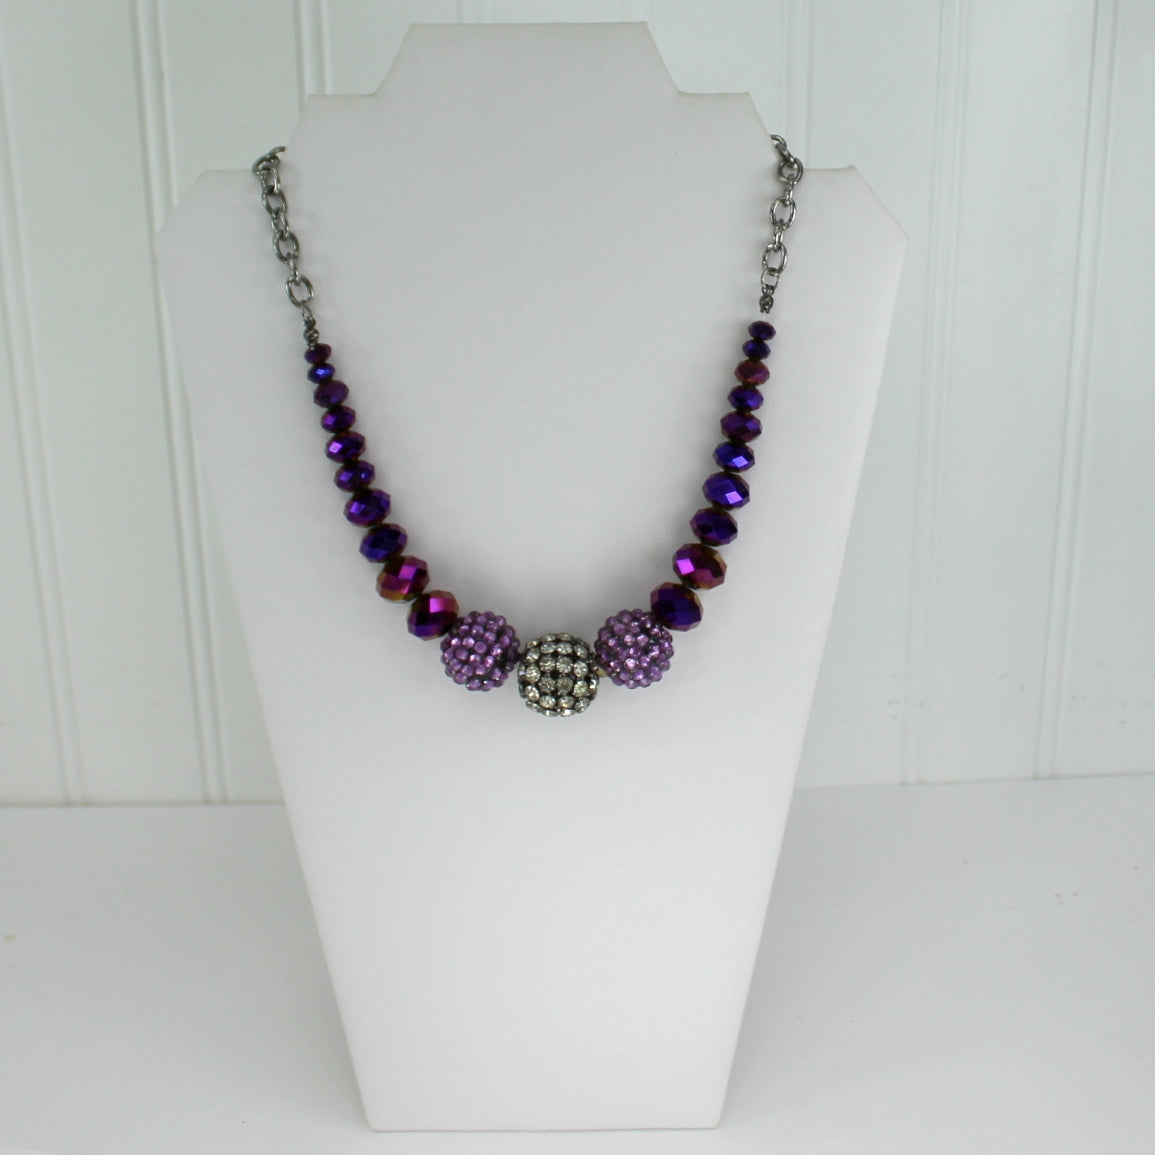 Designed signed Necklace Amethyst Crystal & Iridescent Cut Beads Alive with Sparkle